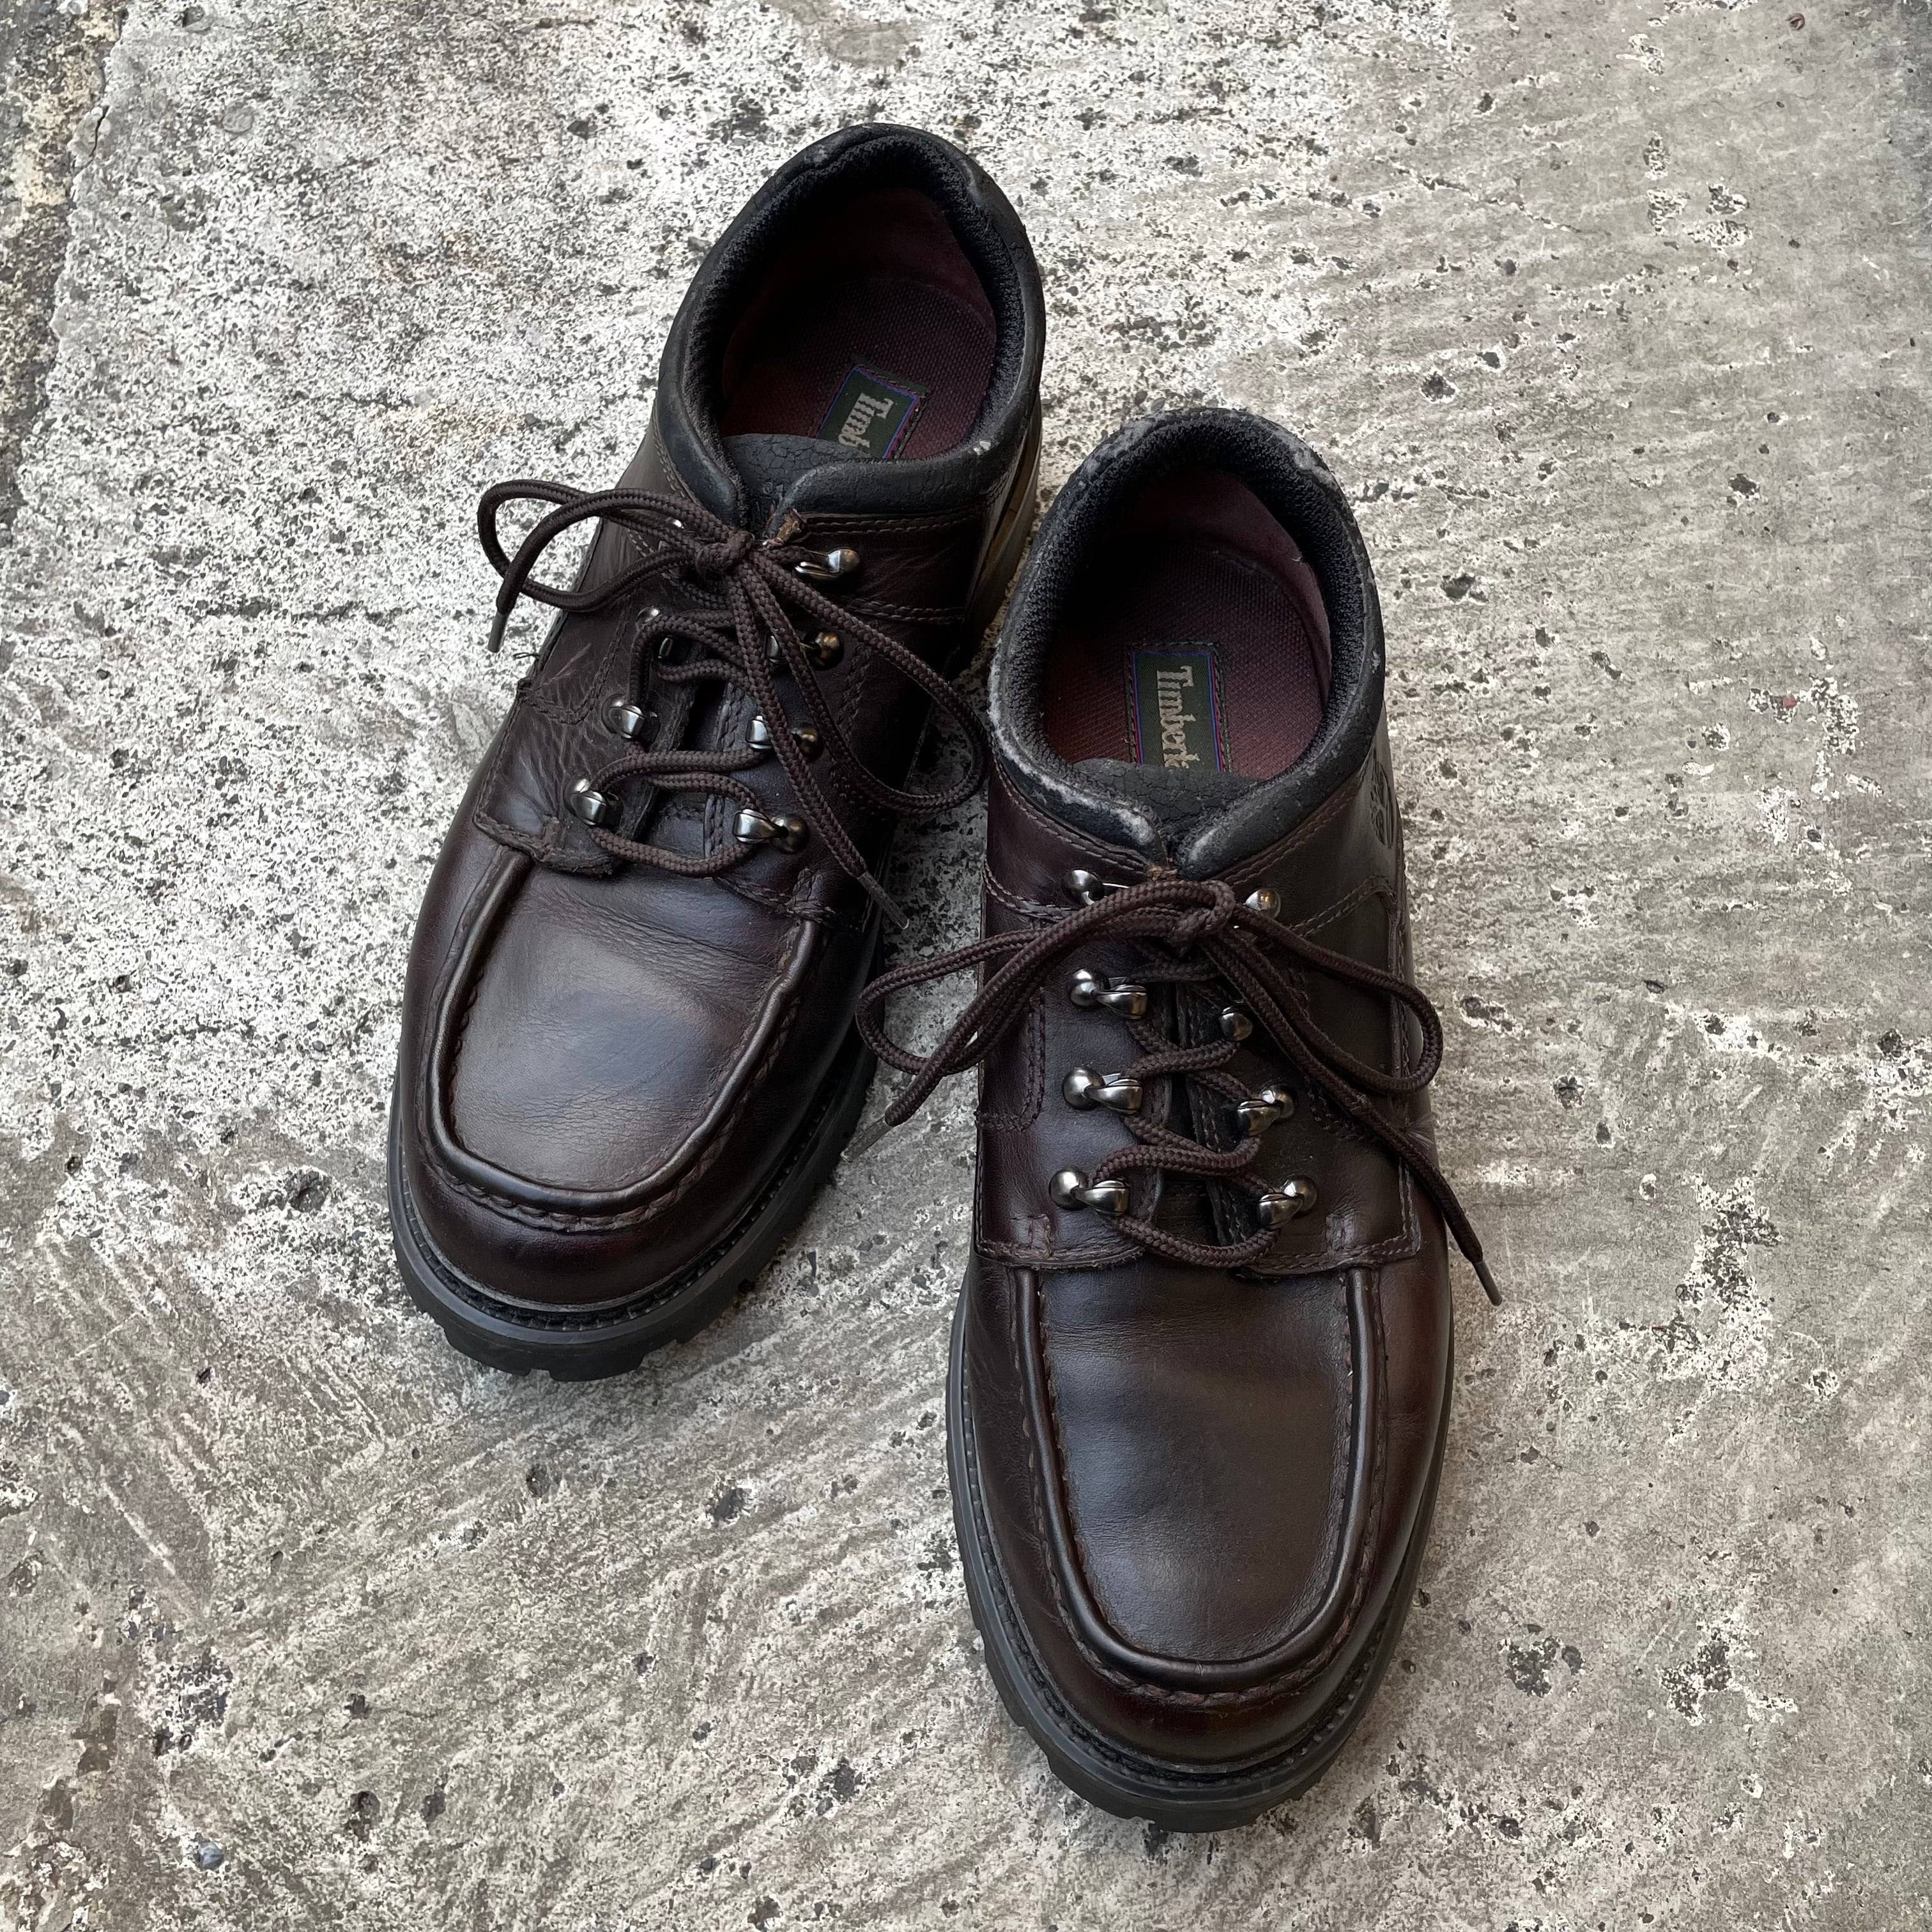 USED】90's vintage "Timberland" LEATHER MOCCASIN DECK SHOES | HEIGHTS Online  Store